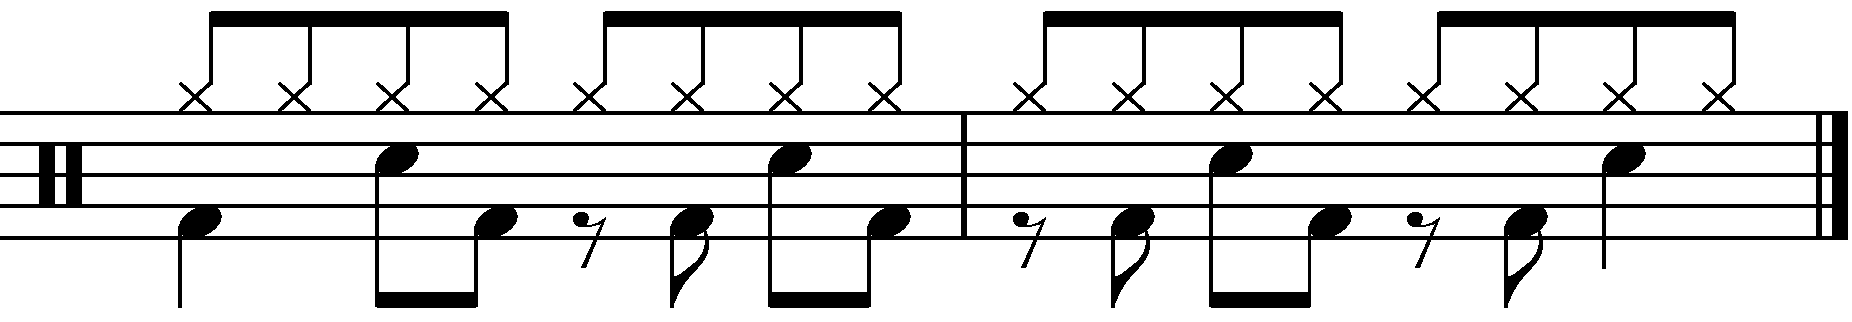 Additional 2 Bar Grooves - 4